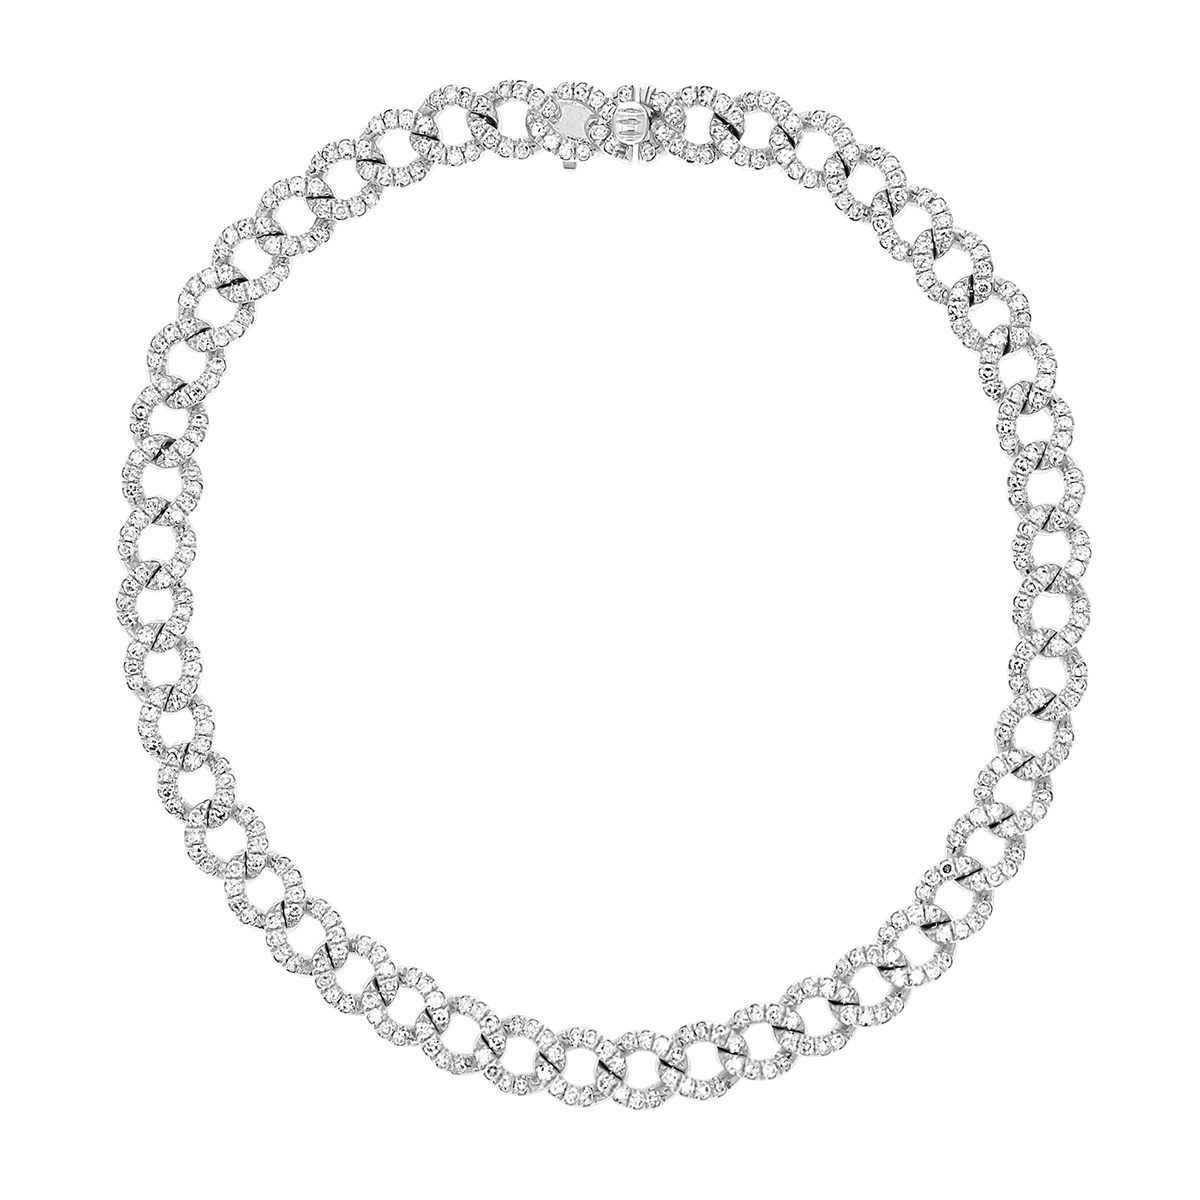 Diamond Cuban Link Bracelet 14K White Gold / 7.5 Inches by Baby Gold - Shop Custom Gold Jewelry